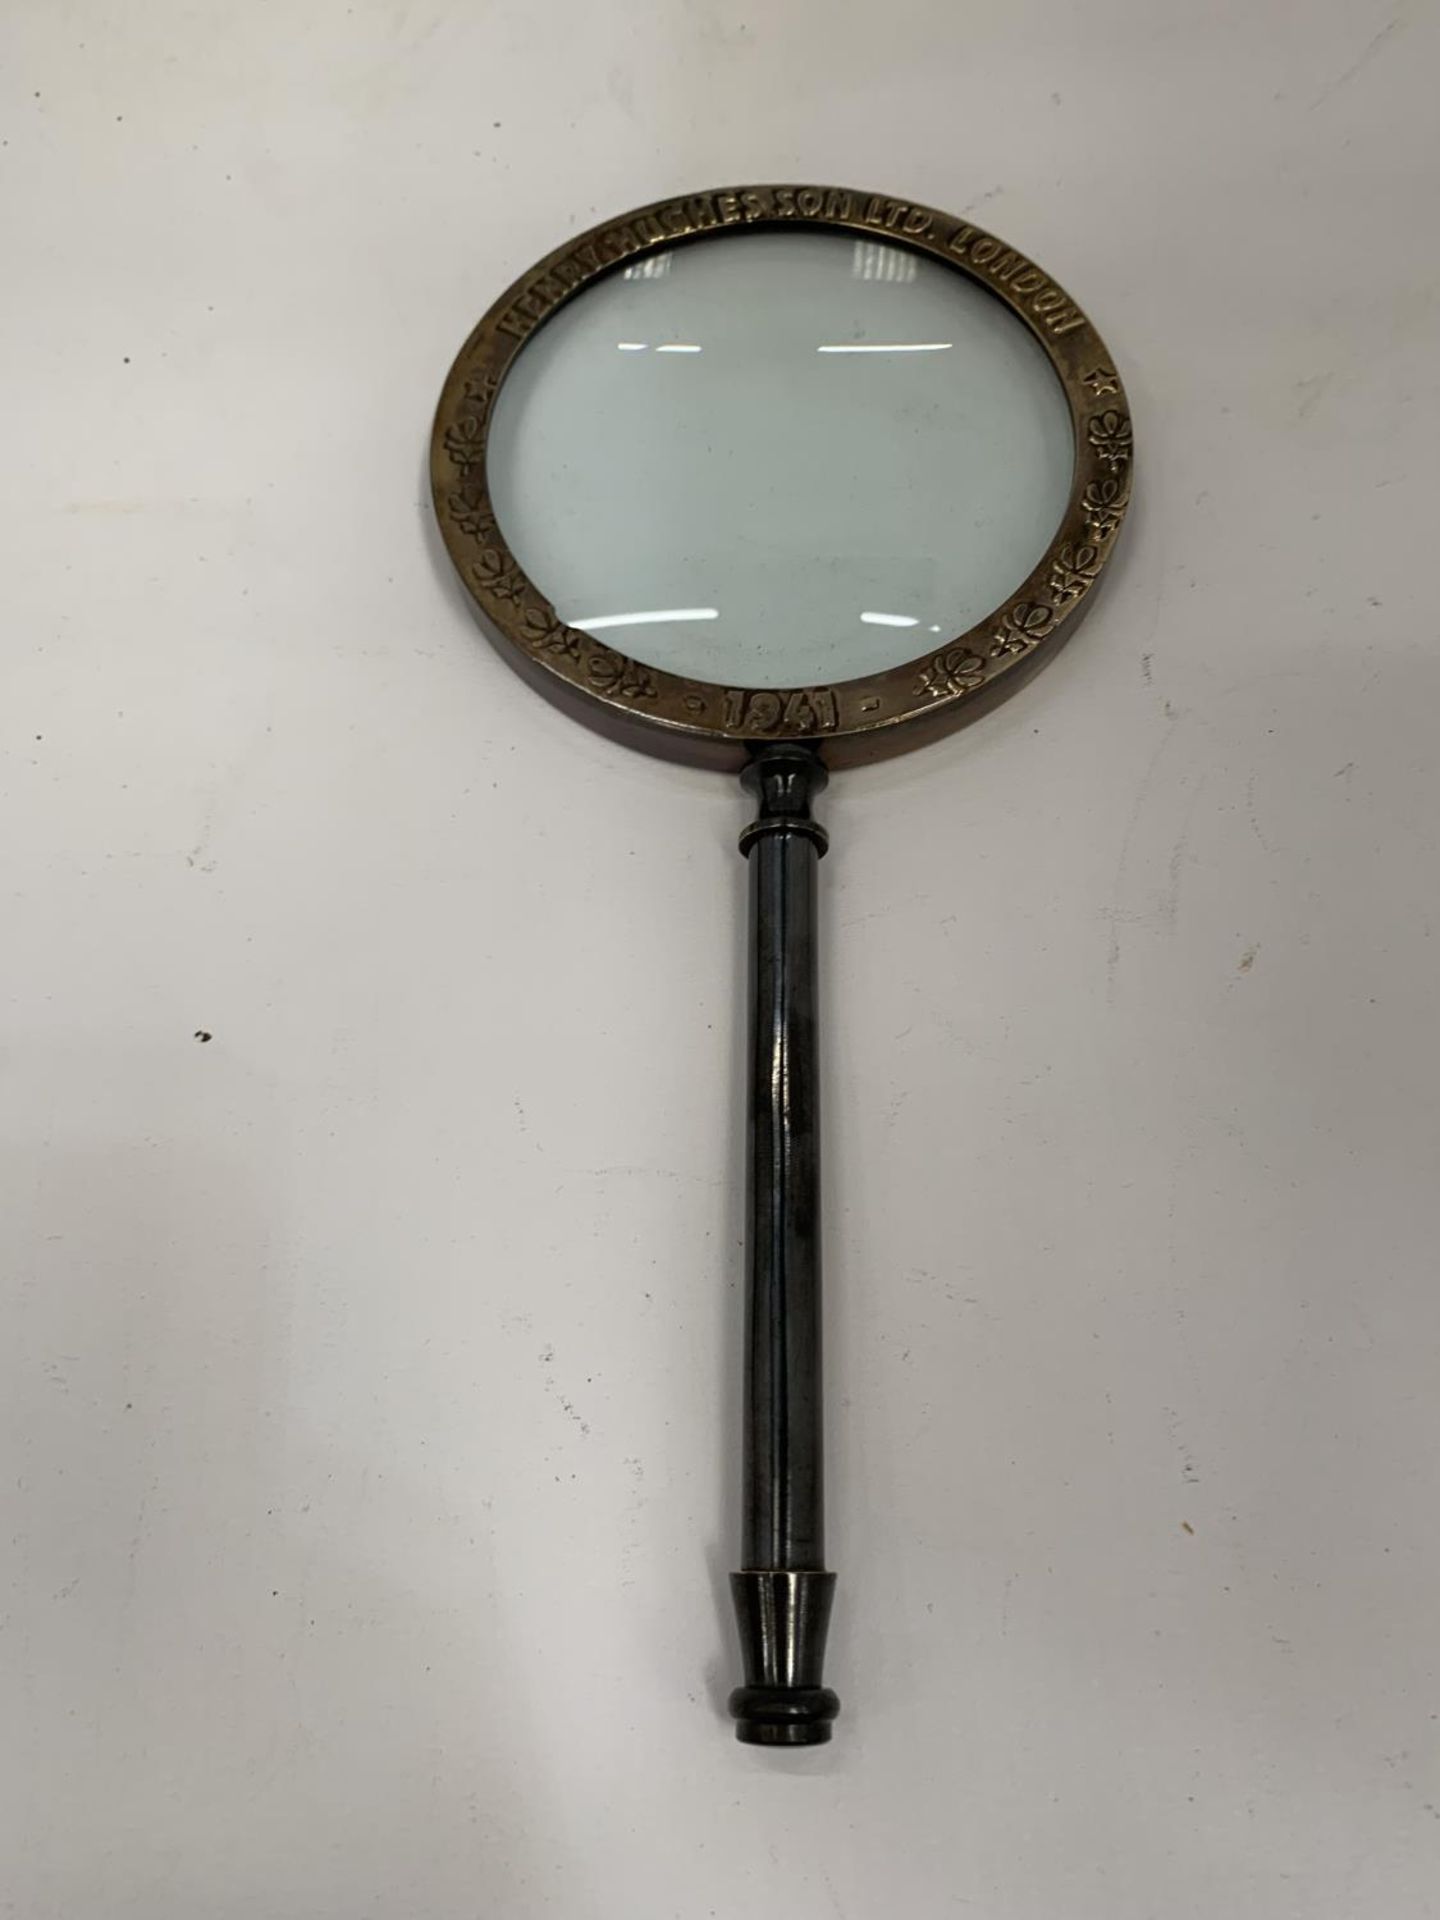 A BRASS MAGNIFYING GLASS IN A LEATHER POUCH - Image 2 of 4